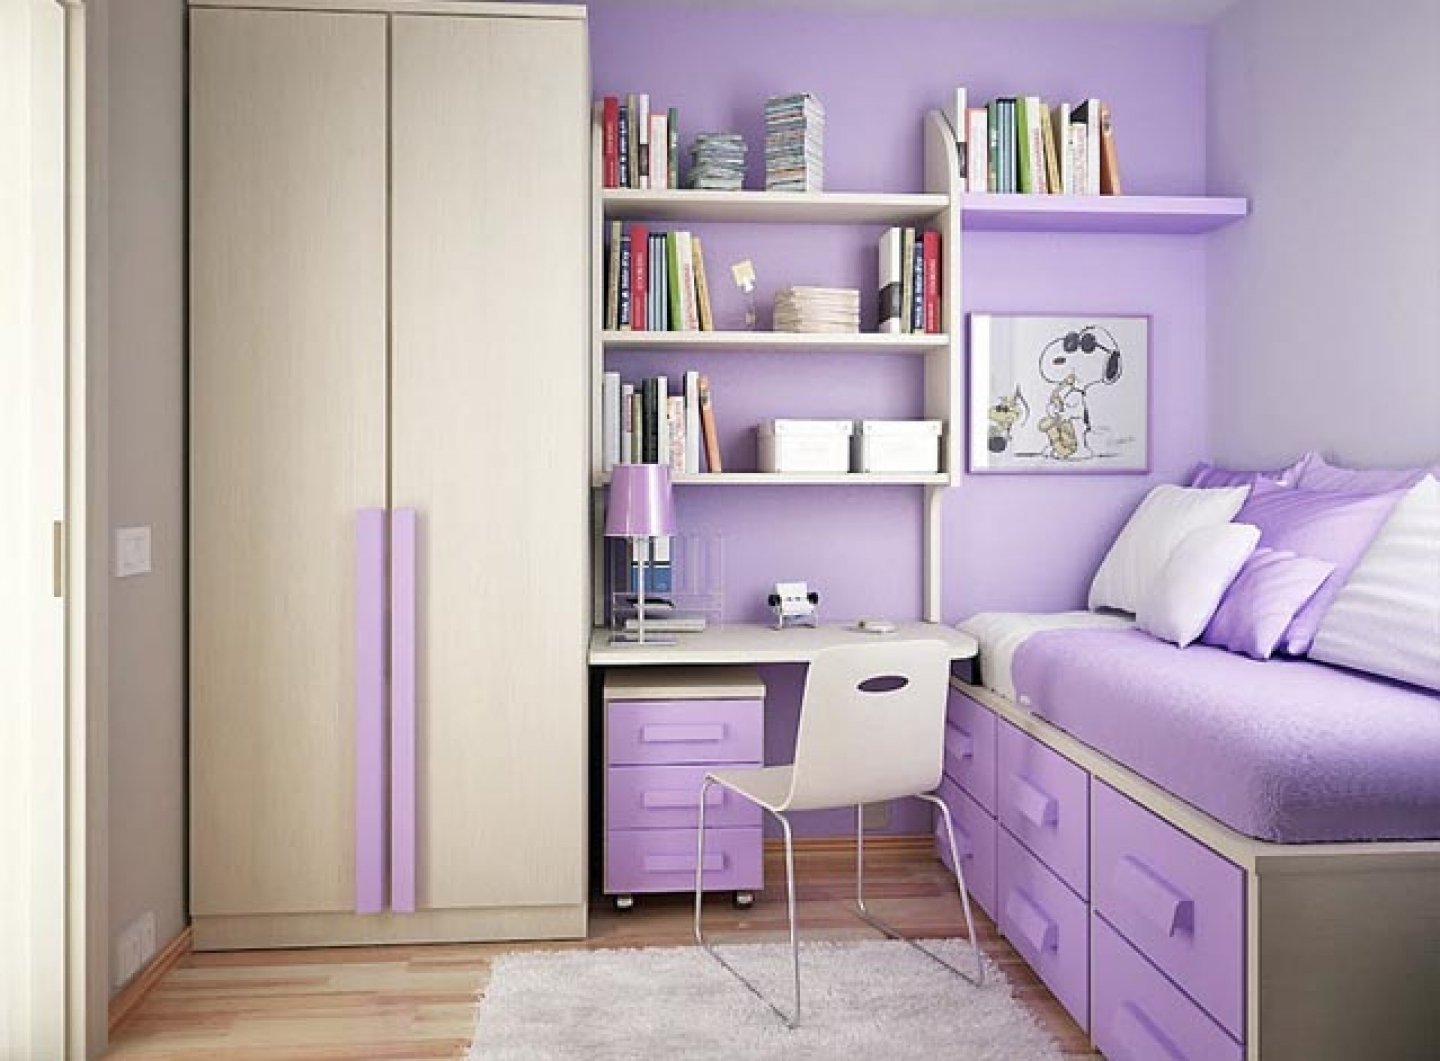 10 Most Recommended Small Bedroom Ideas For Teenage Girls awesome cute bedroom ideas for small rooms womenmisbehavin 1 2023